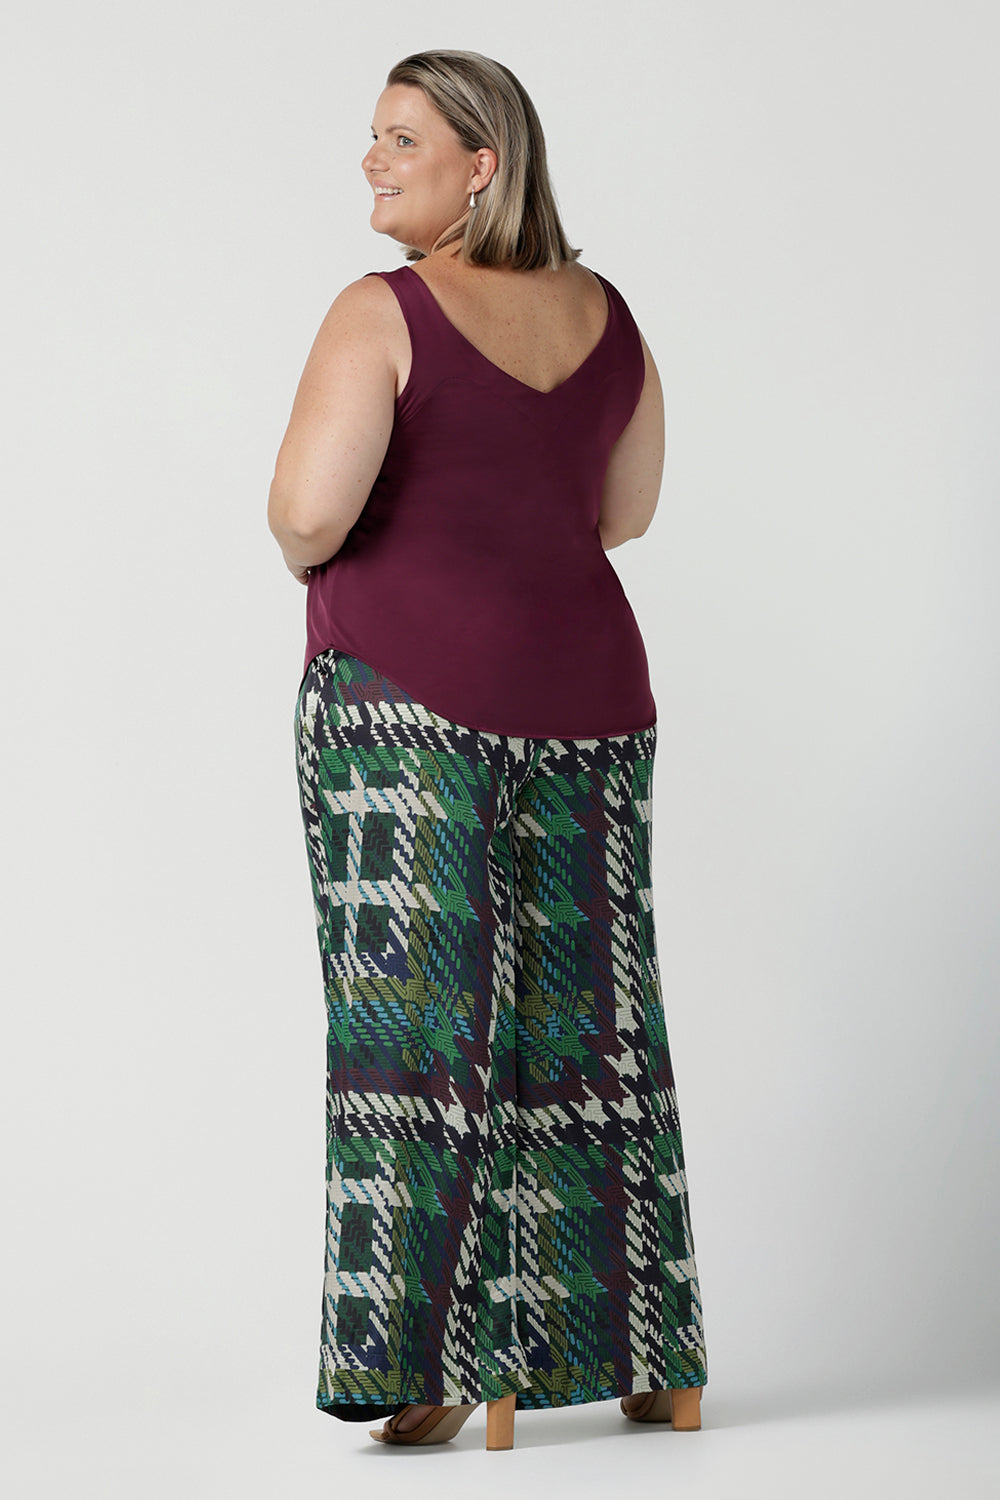 Back view of a size 18 Woman wears the Ellery Pant in Silky Italian Viscose. Size inclusive fashion. Tailored pants for work to event dressing. Made in Australia for women size 8 - 24.